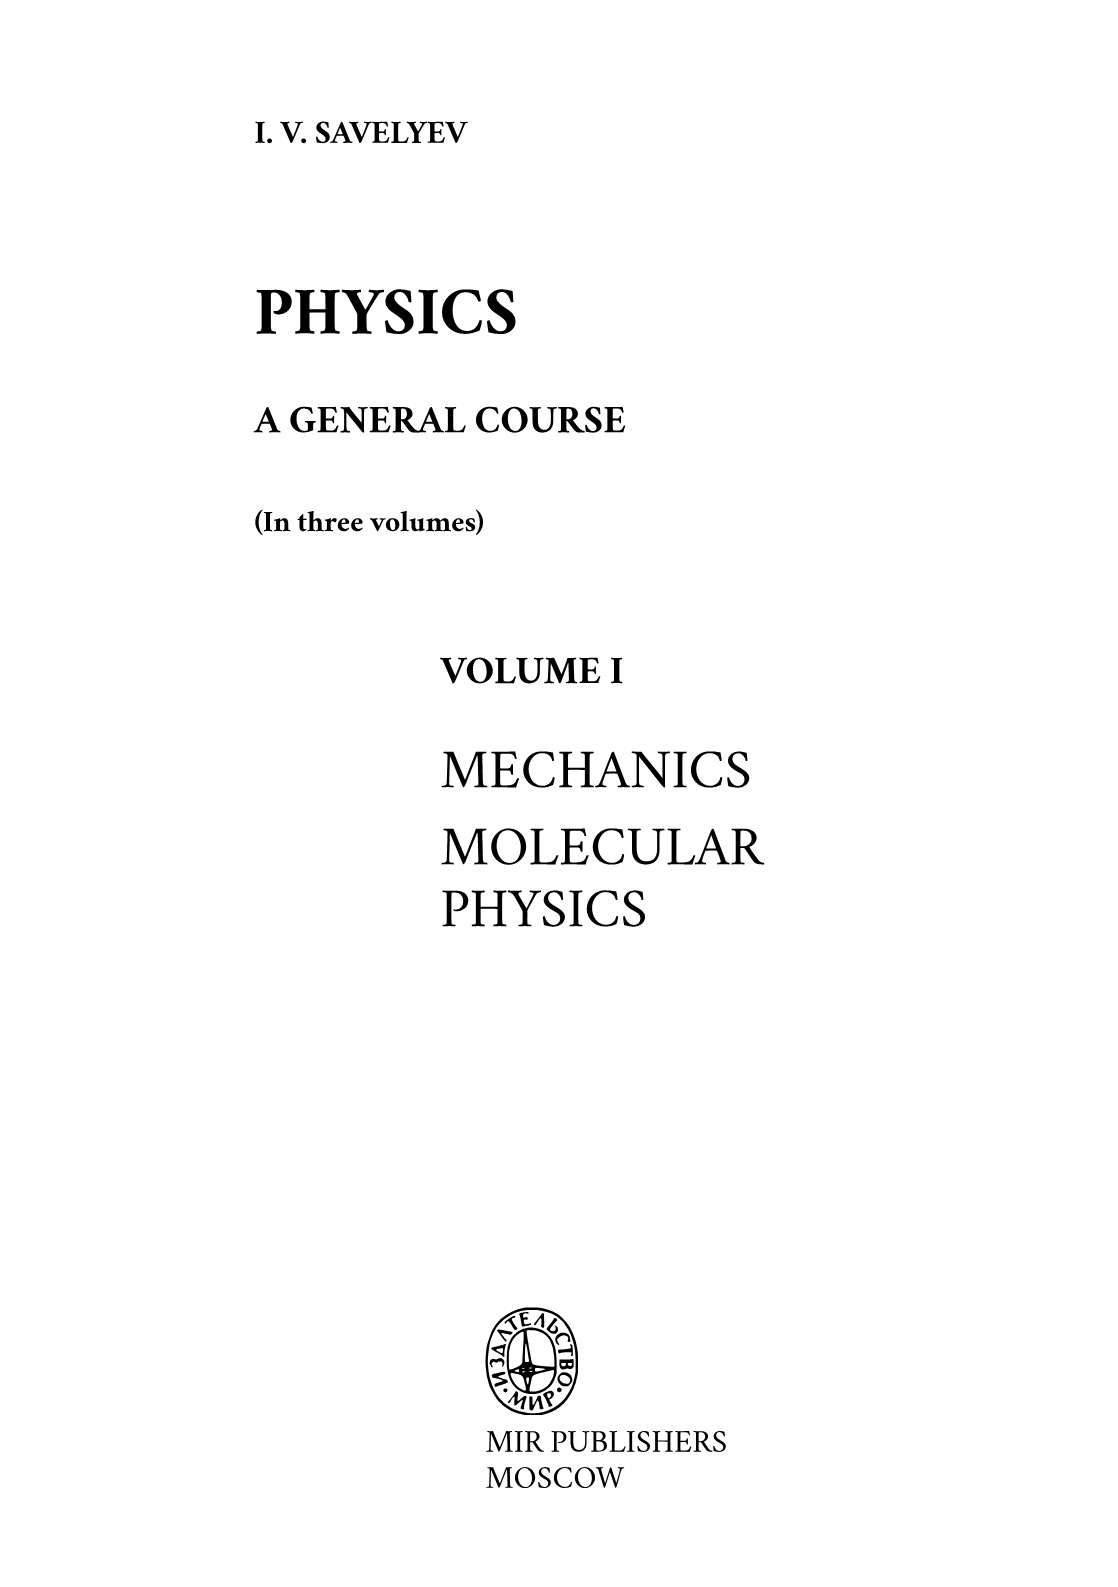 saveliev_physics_general_course_1_3.png